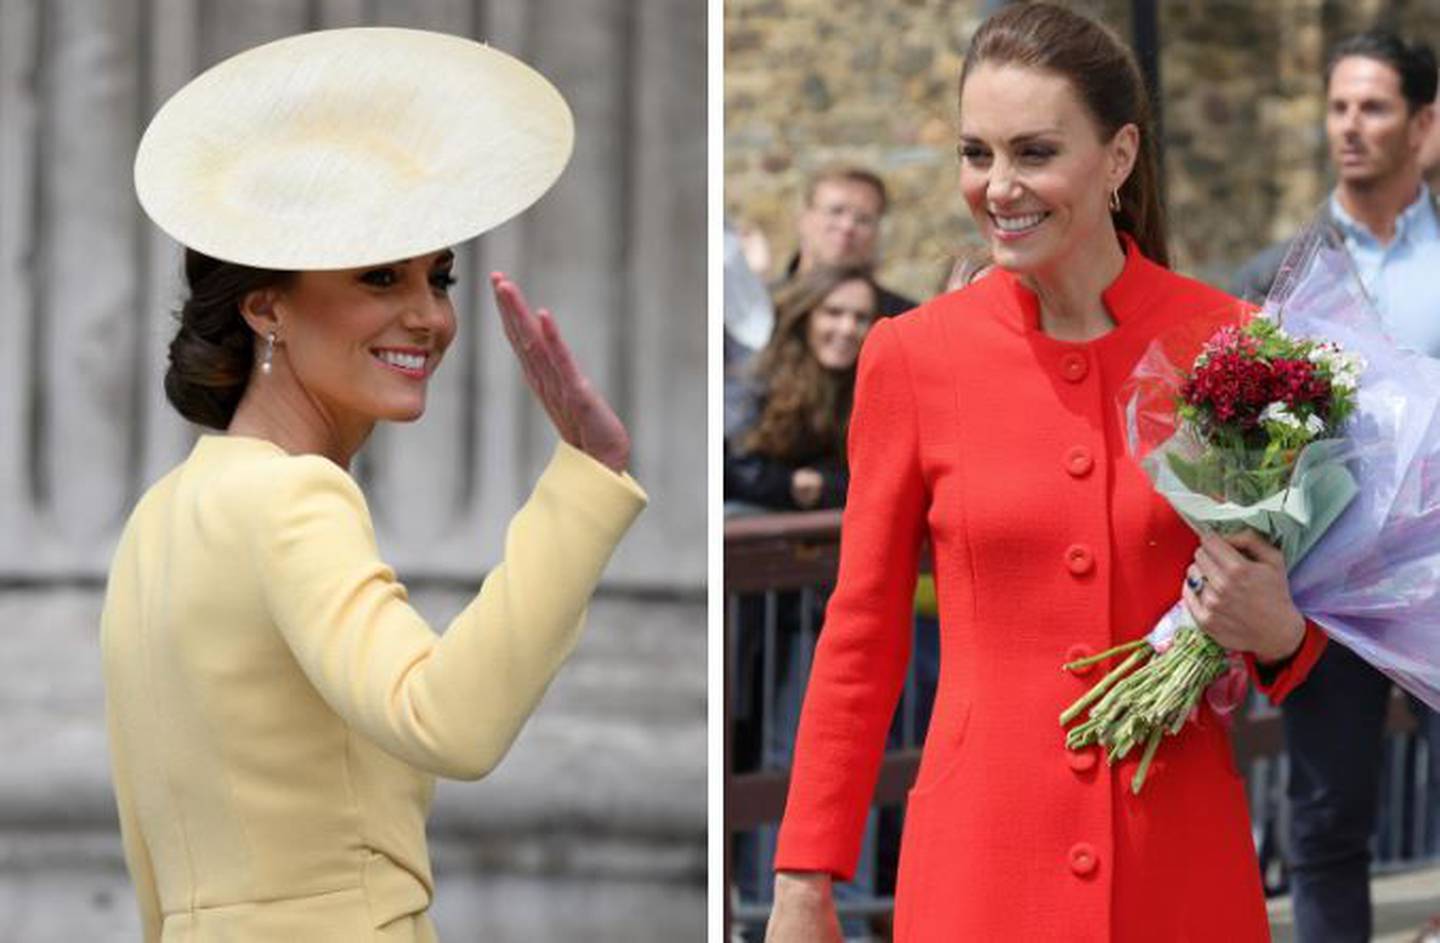 Kate Middleton has uppеd the stakes with her designer wardrobe. The Duchess has wоrn over $83,000 worth of clothing in just 100 days